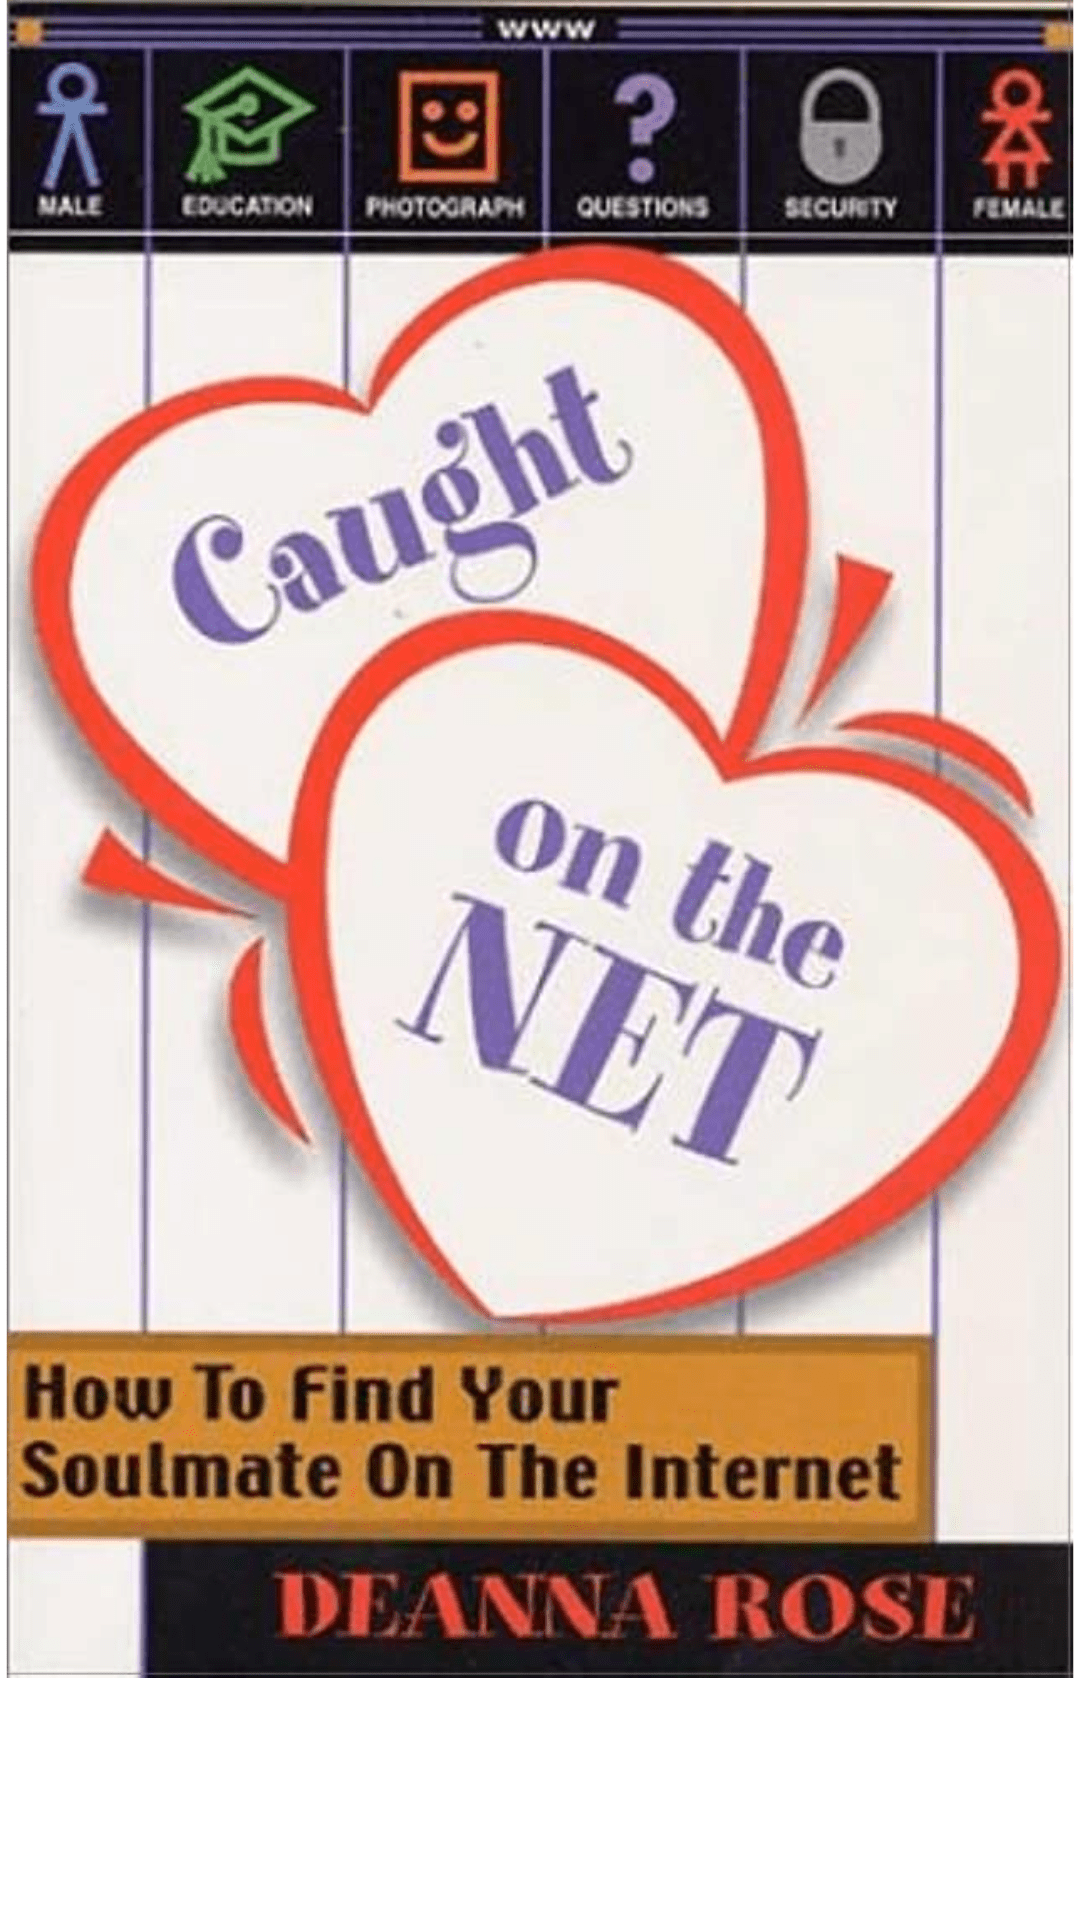 Caught on the Net by Deanna Rose